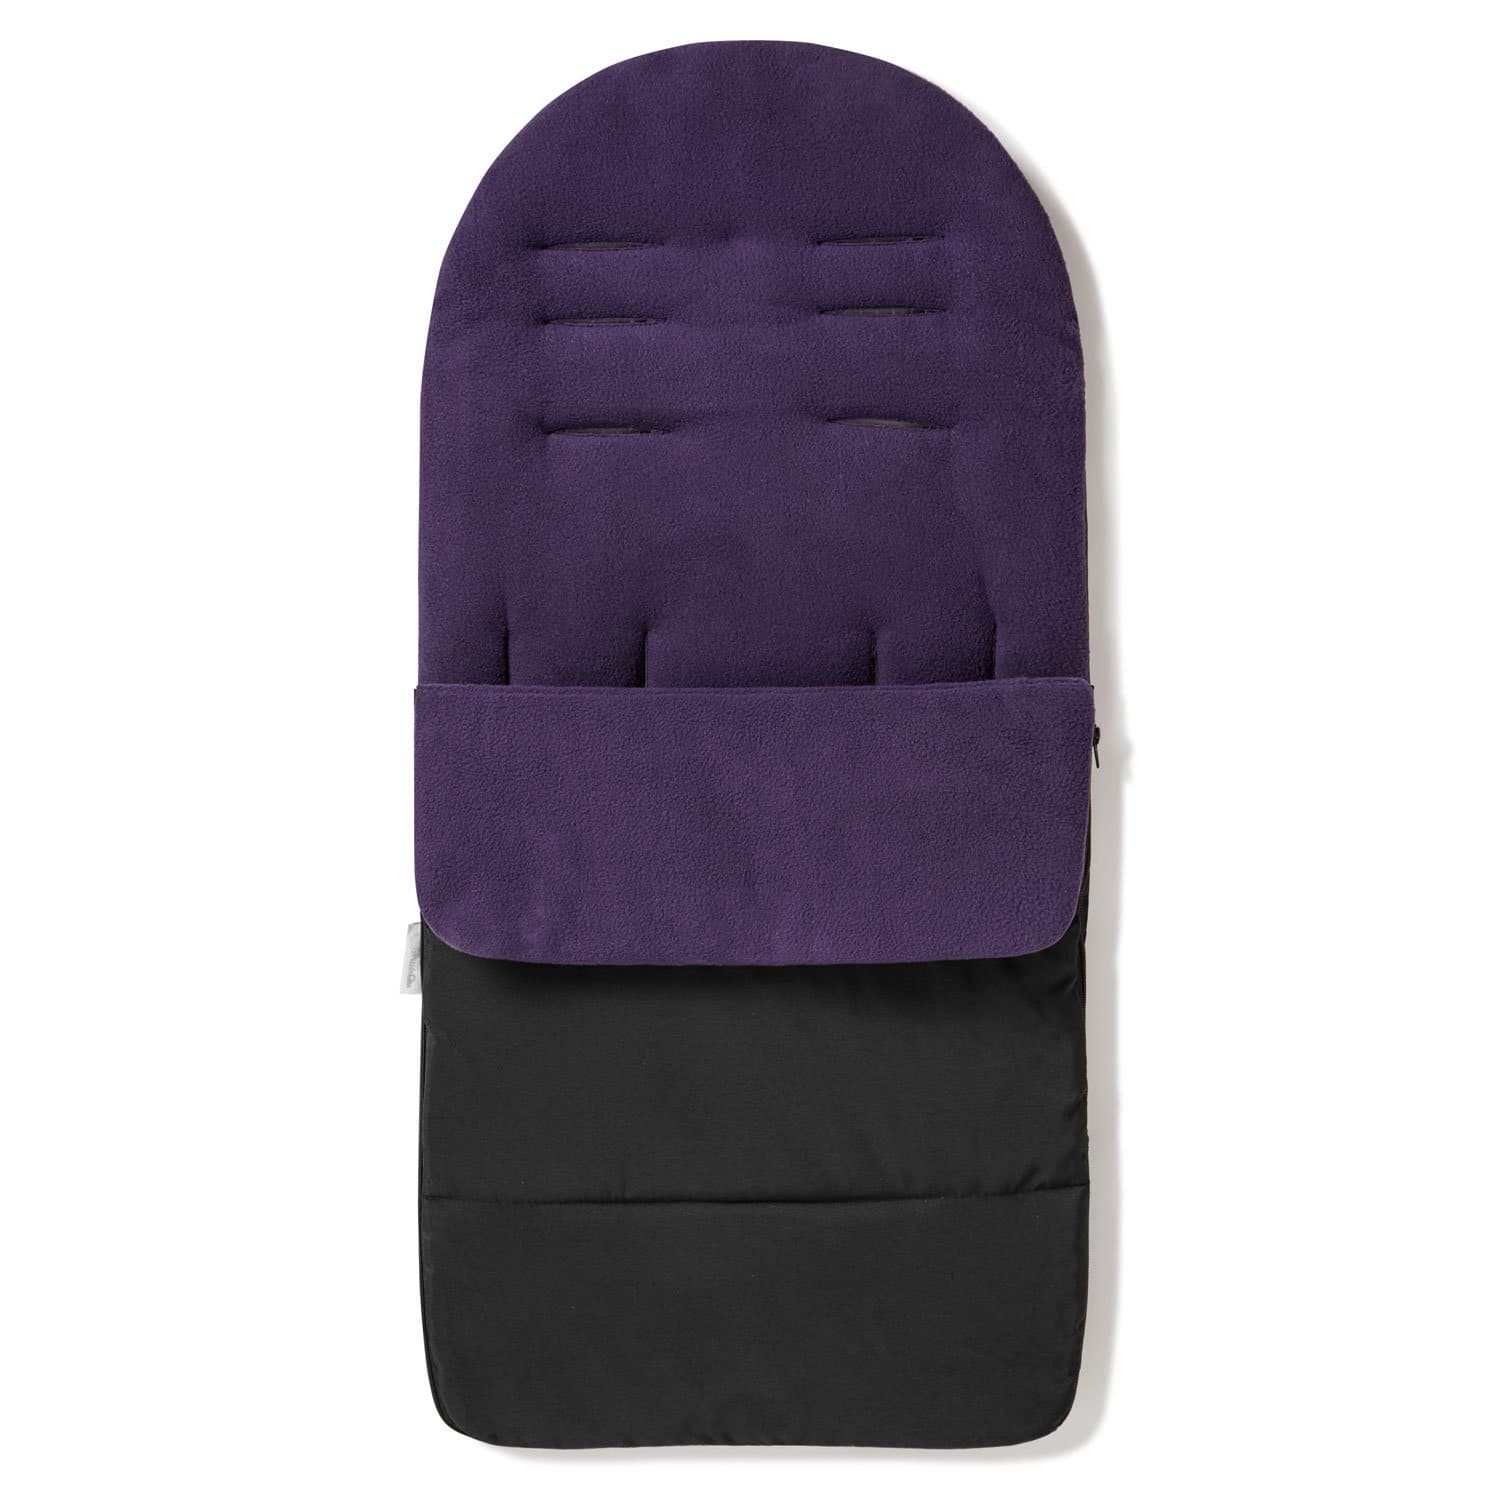 Premium Footmuff / Cosy Toes Compatible with Koelstra - Plum Purple / Fits All Models | For Your Little One